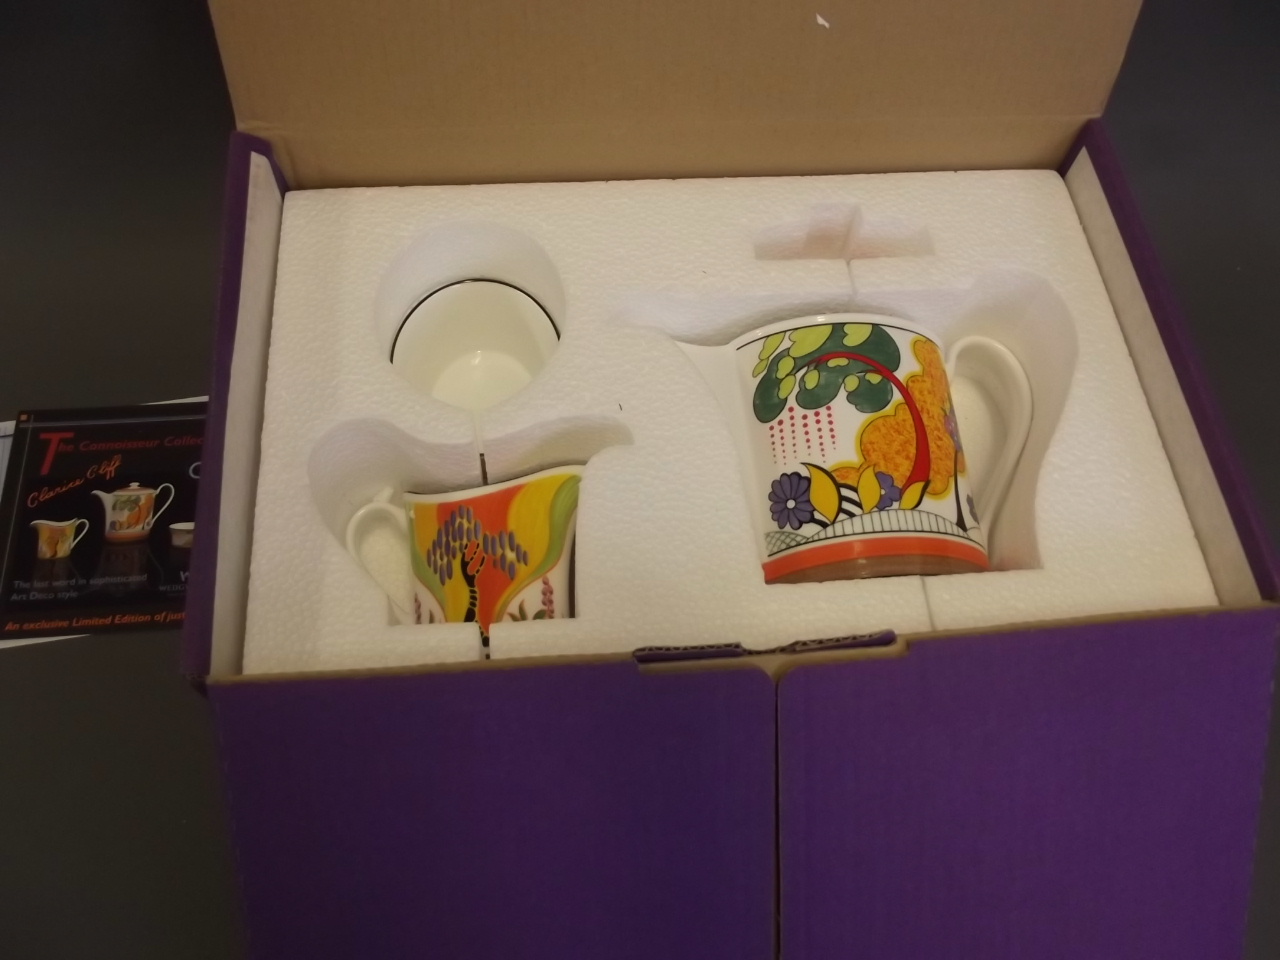 A Wedgwood Limited Edition Clarice Cliff tea service, boxed